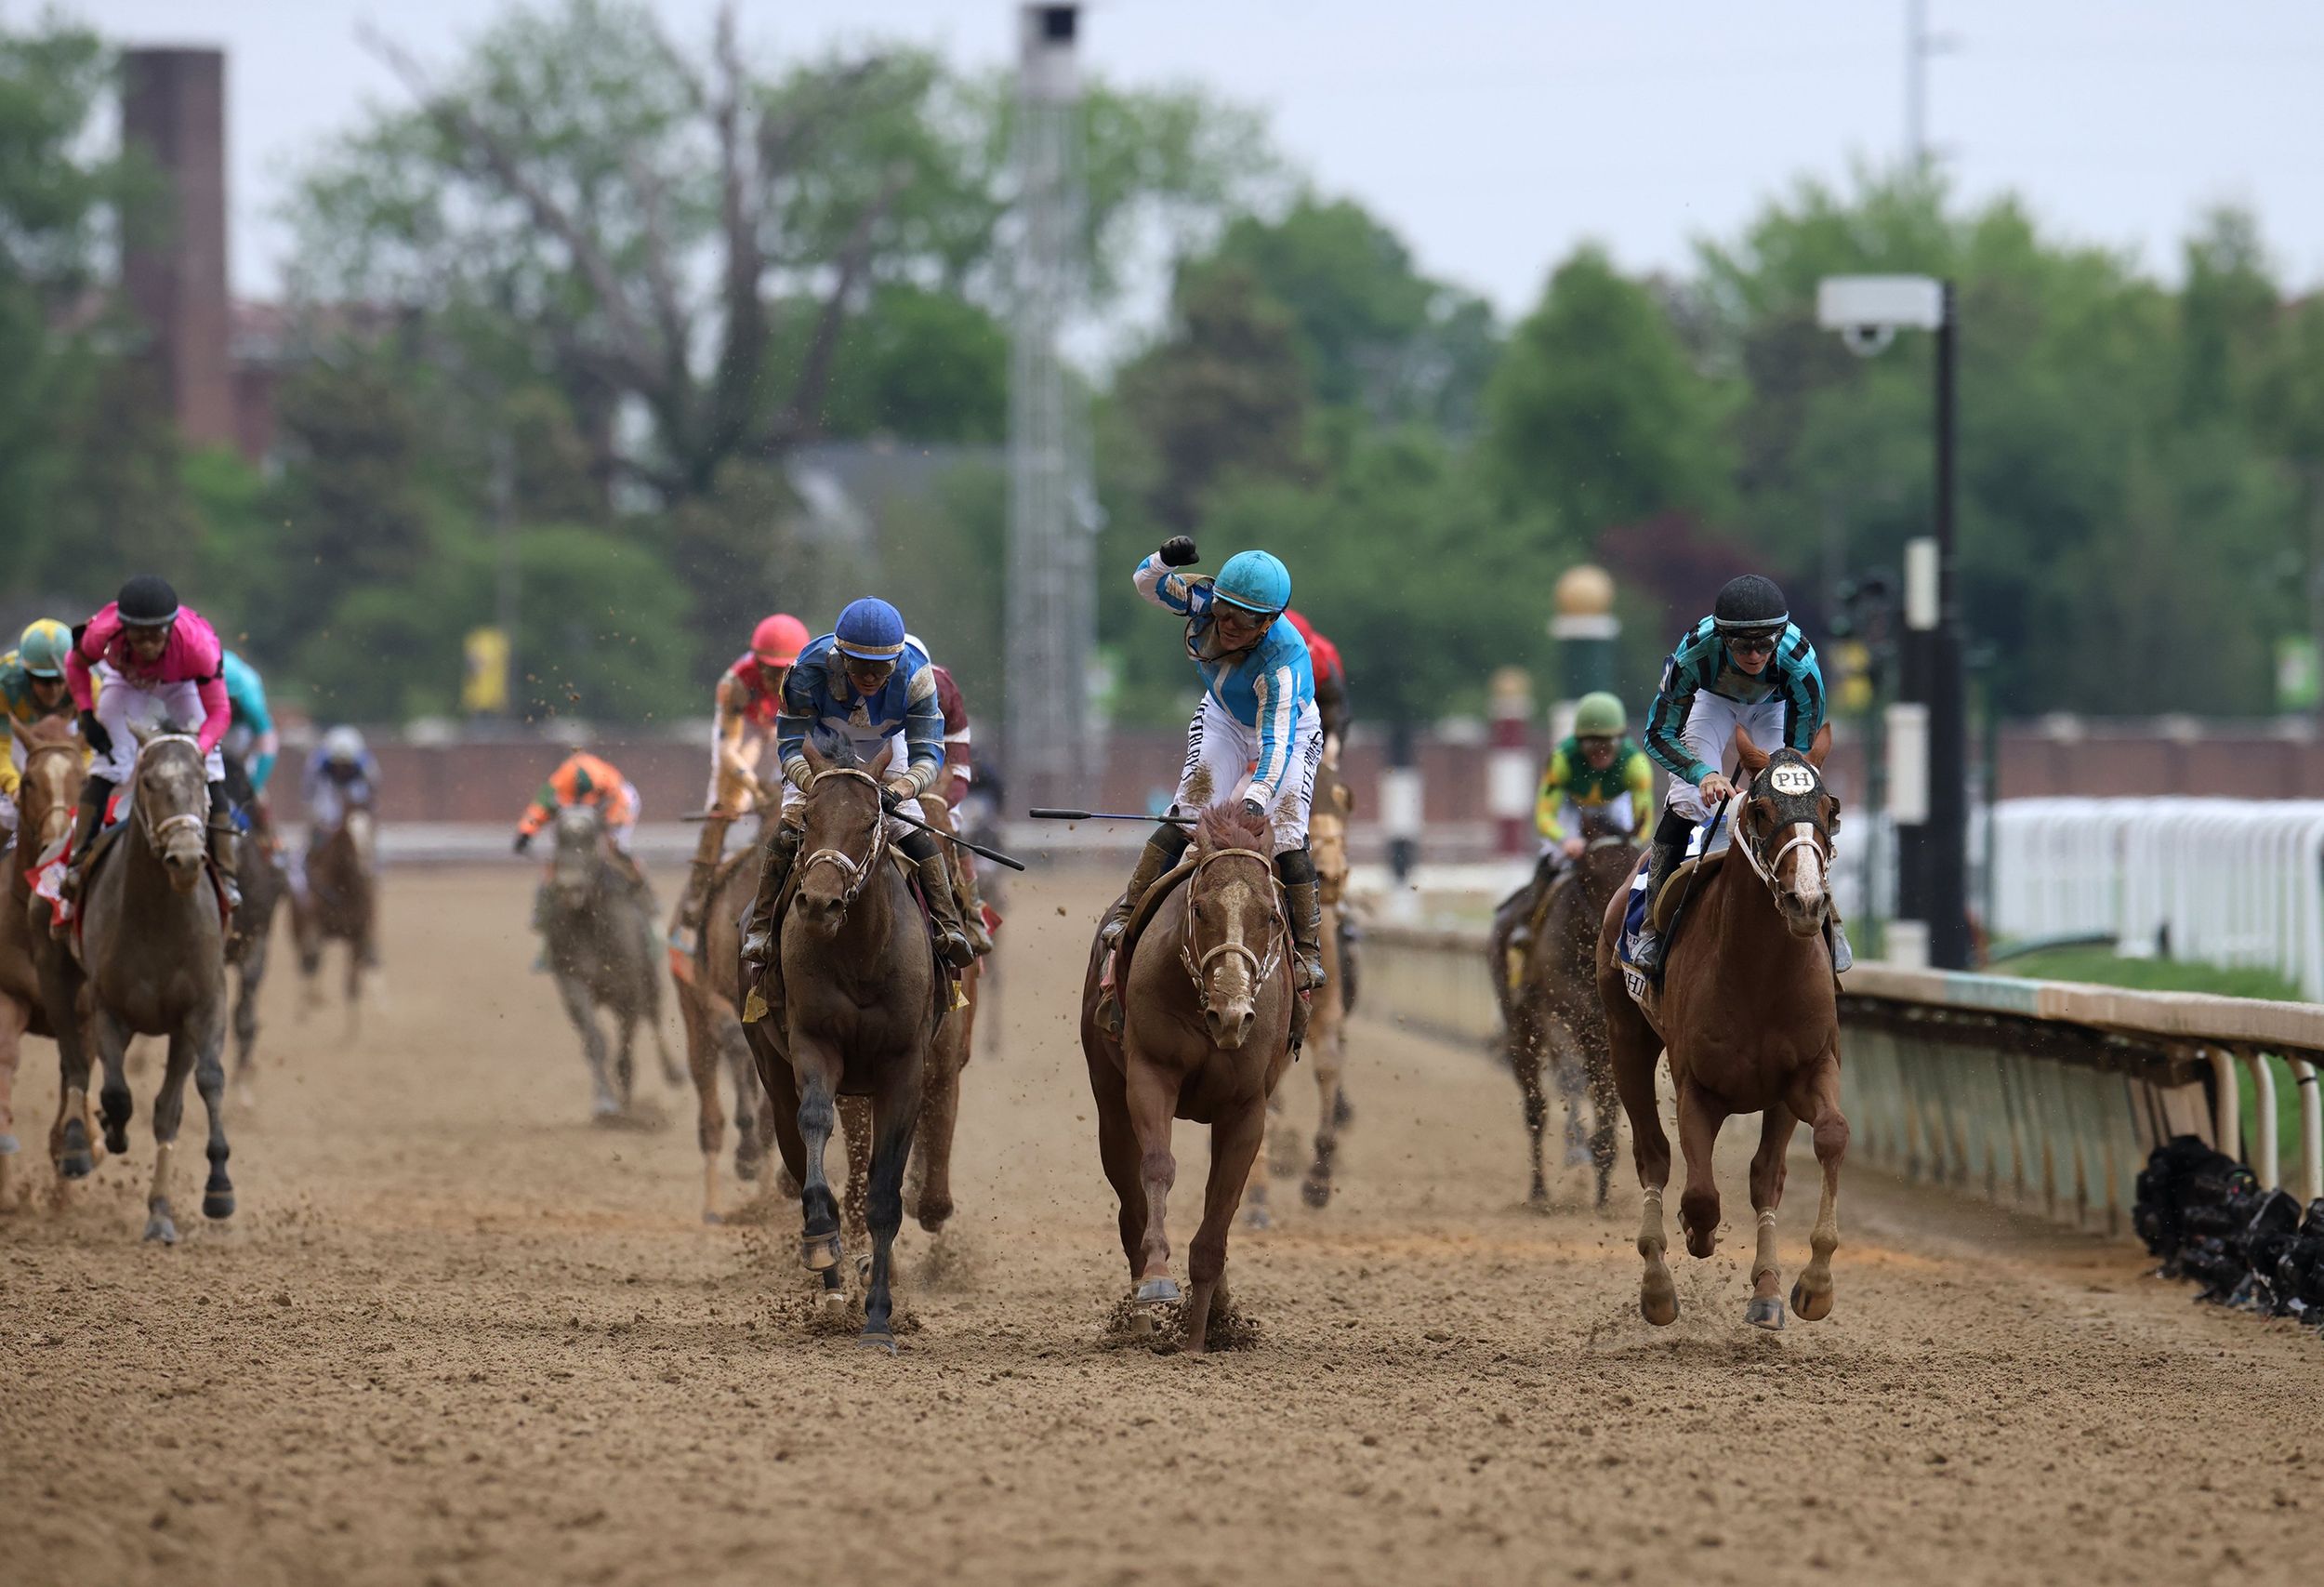 Mage wins Kentucky Derby after runup rife with scratches and tragedy